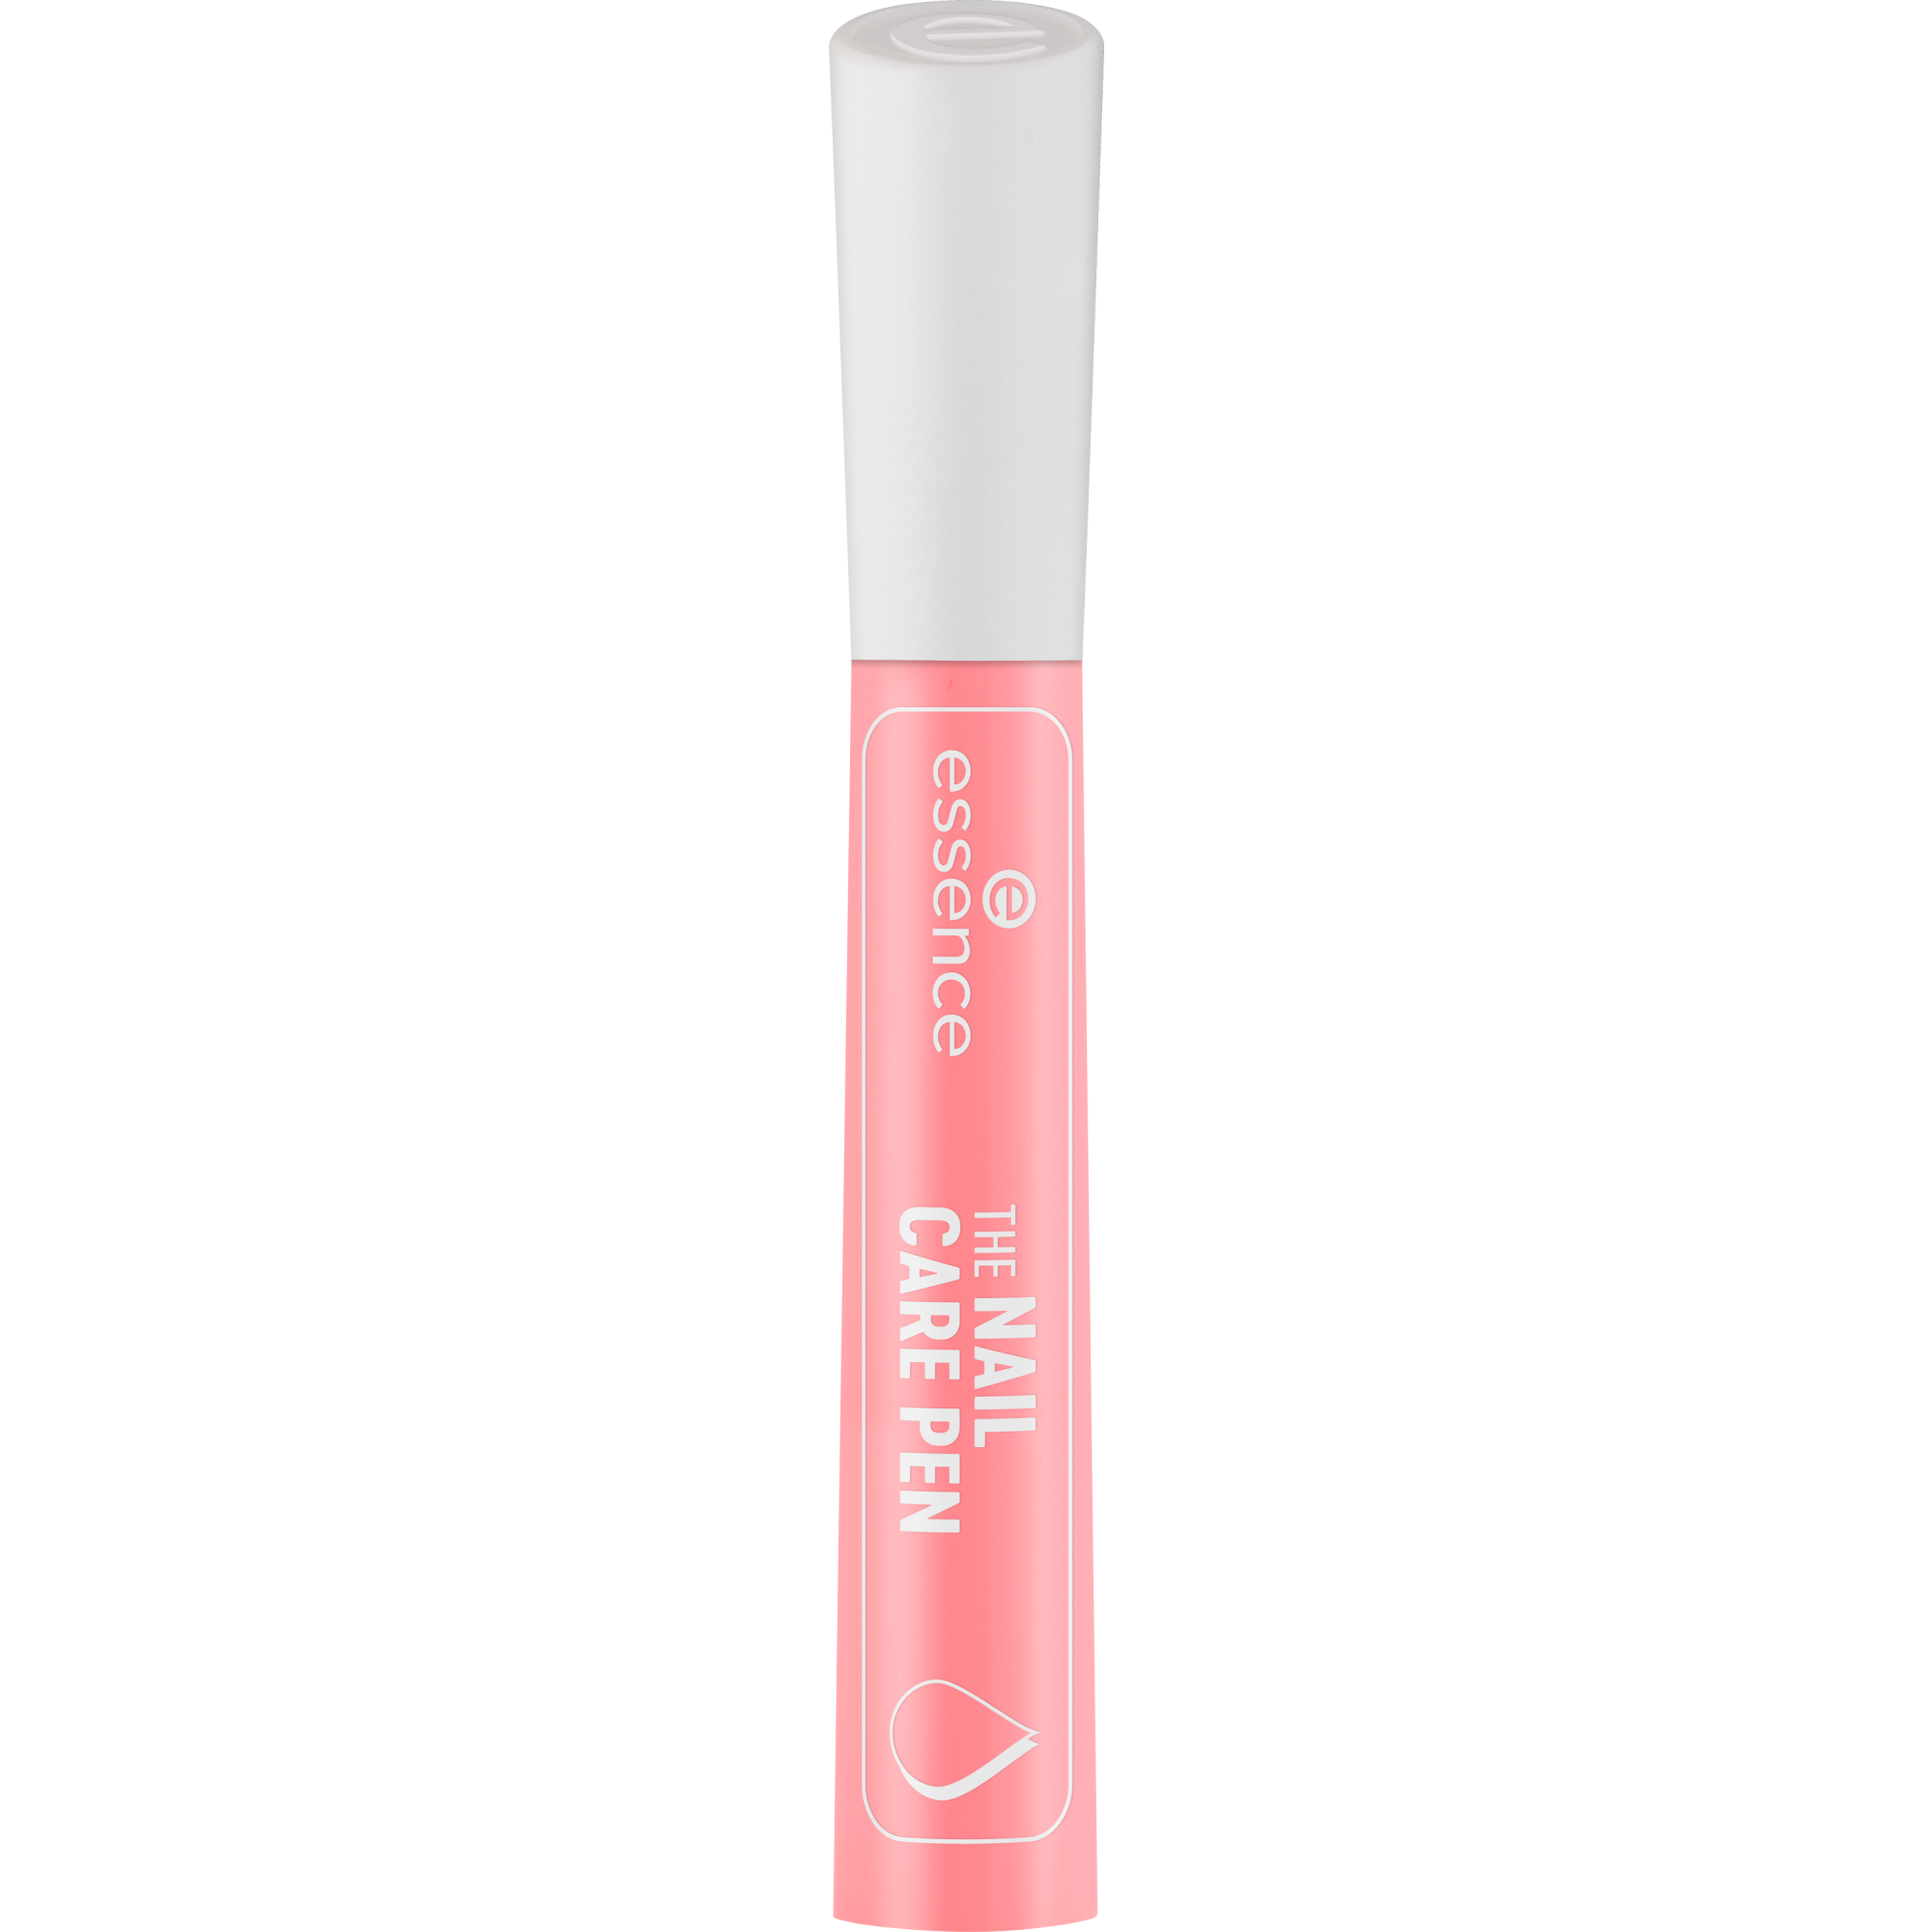 THE NAIL CARE PEN